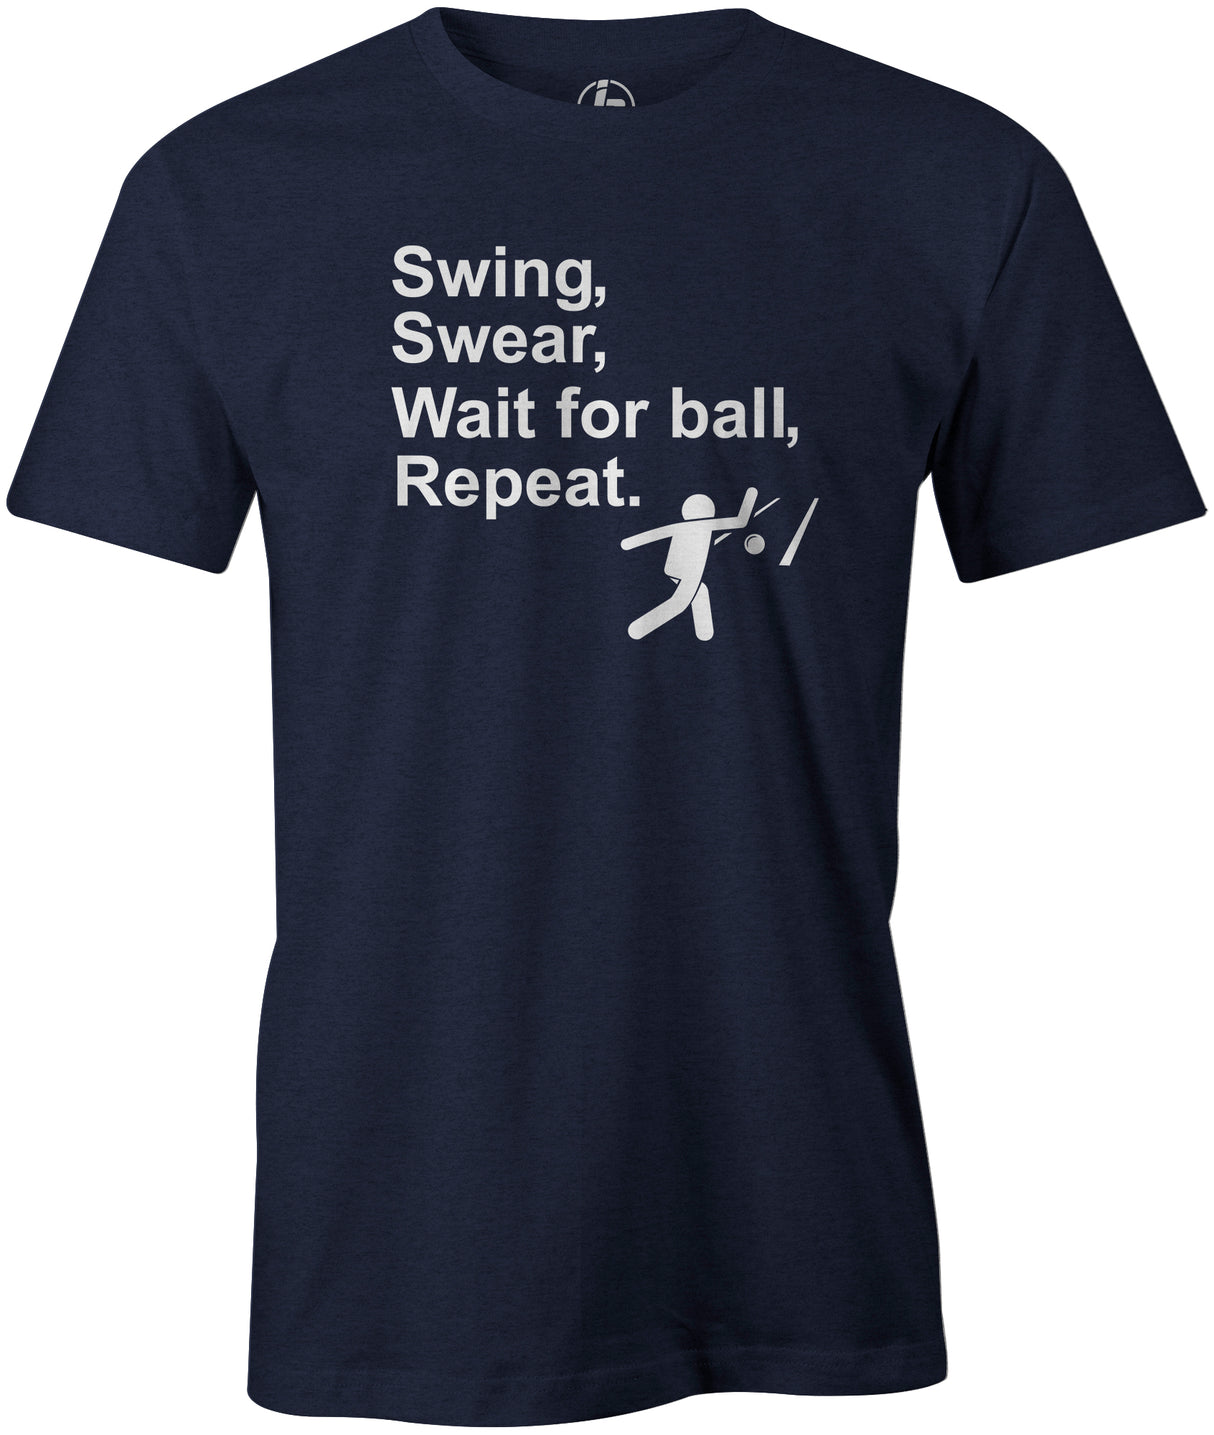 We have a very simple formula for life: Swing, Swear, Wait for Ball, Repeat! Bowling, Tshirt, gift, funny, free, novelty, golf, shirt, tshirt, tee, shirt, pba, pwba, pro bowling, league bowling, league night, strike, spare, gutter,  navy